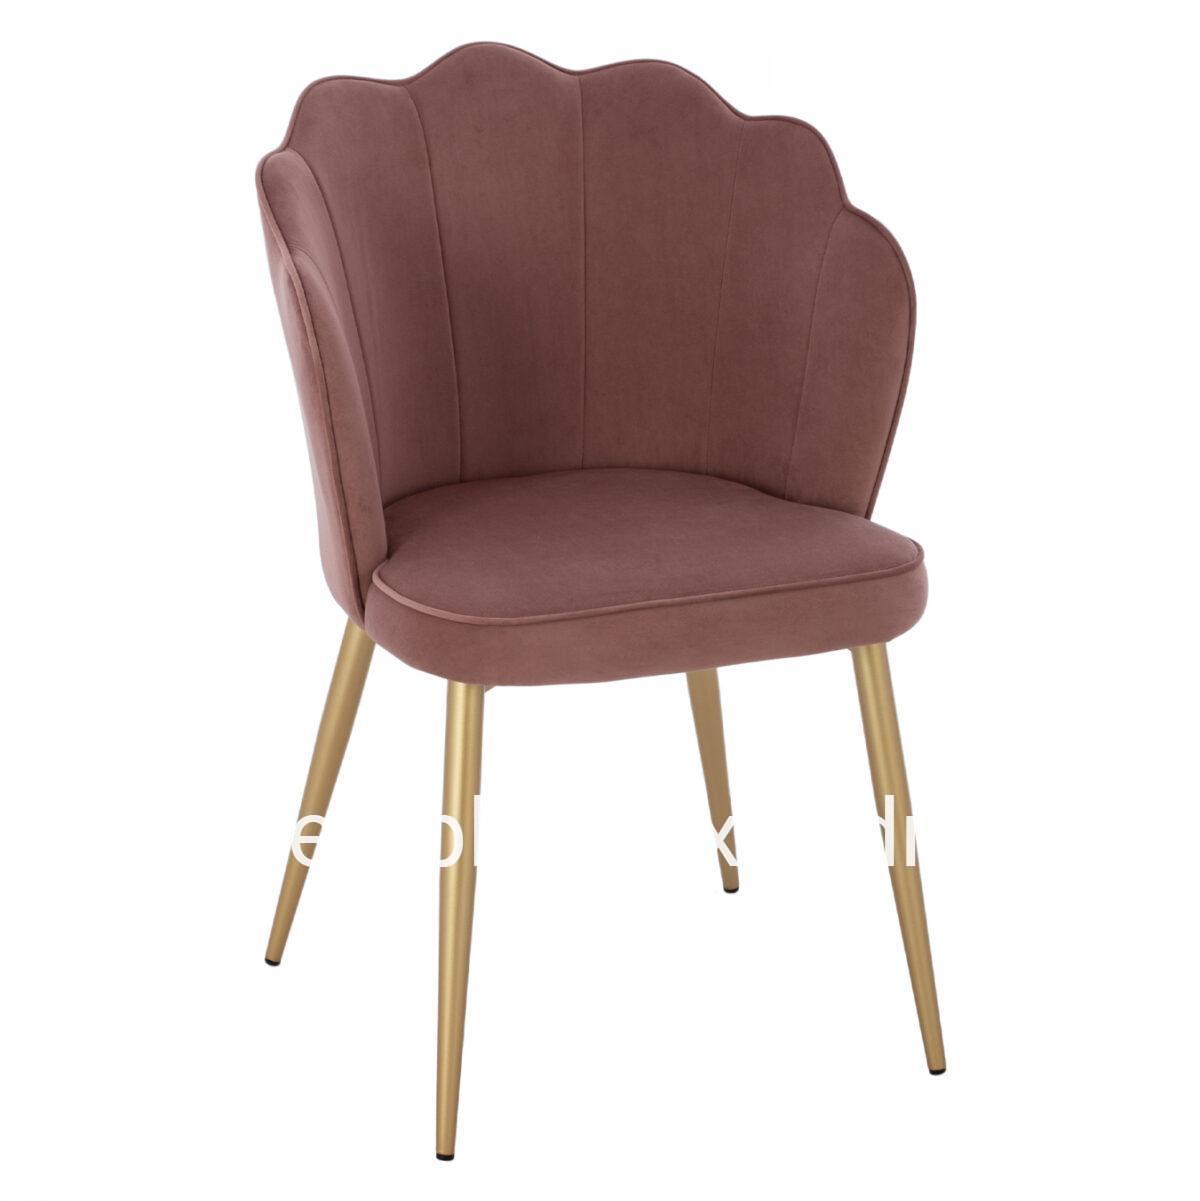 CHAIR HM8737.02 VELVET DUSTY PINK WITH METAL GOLD FRAME 48x48x85 cm.